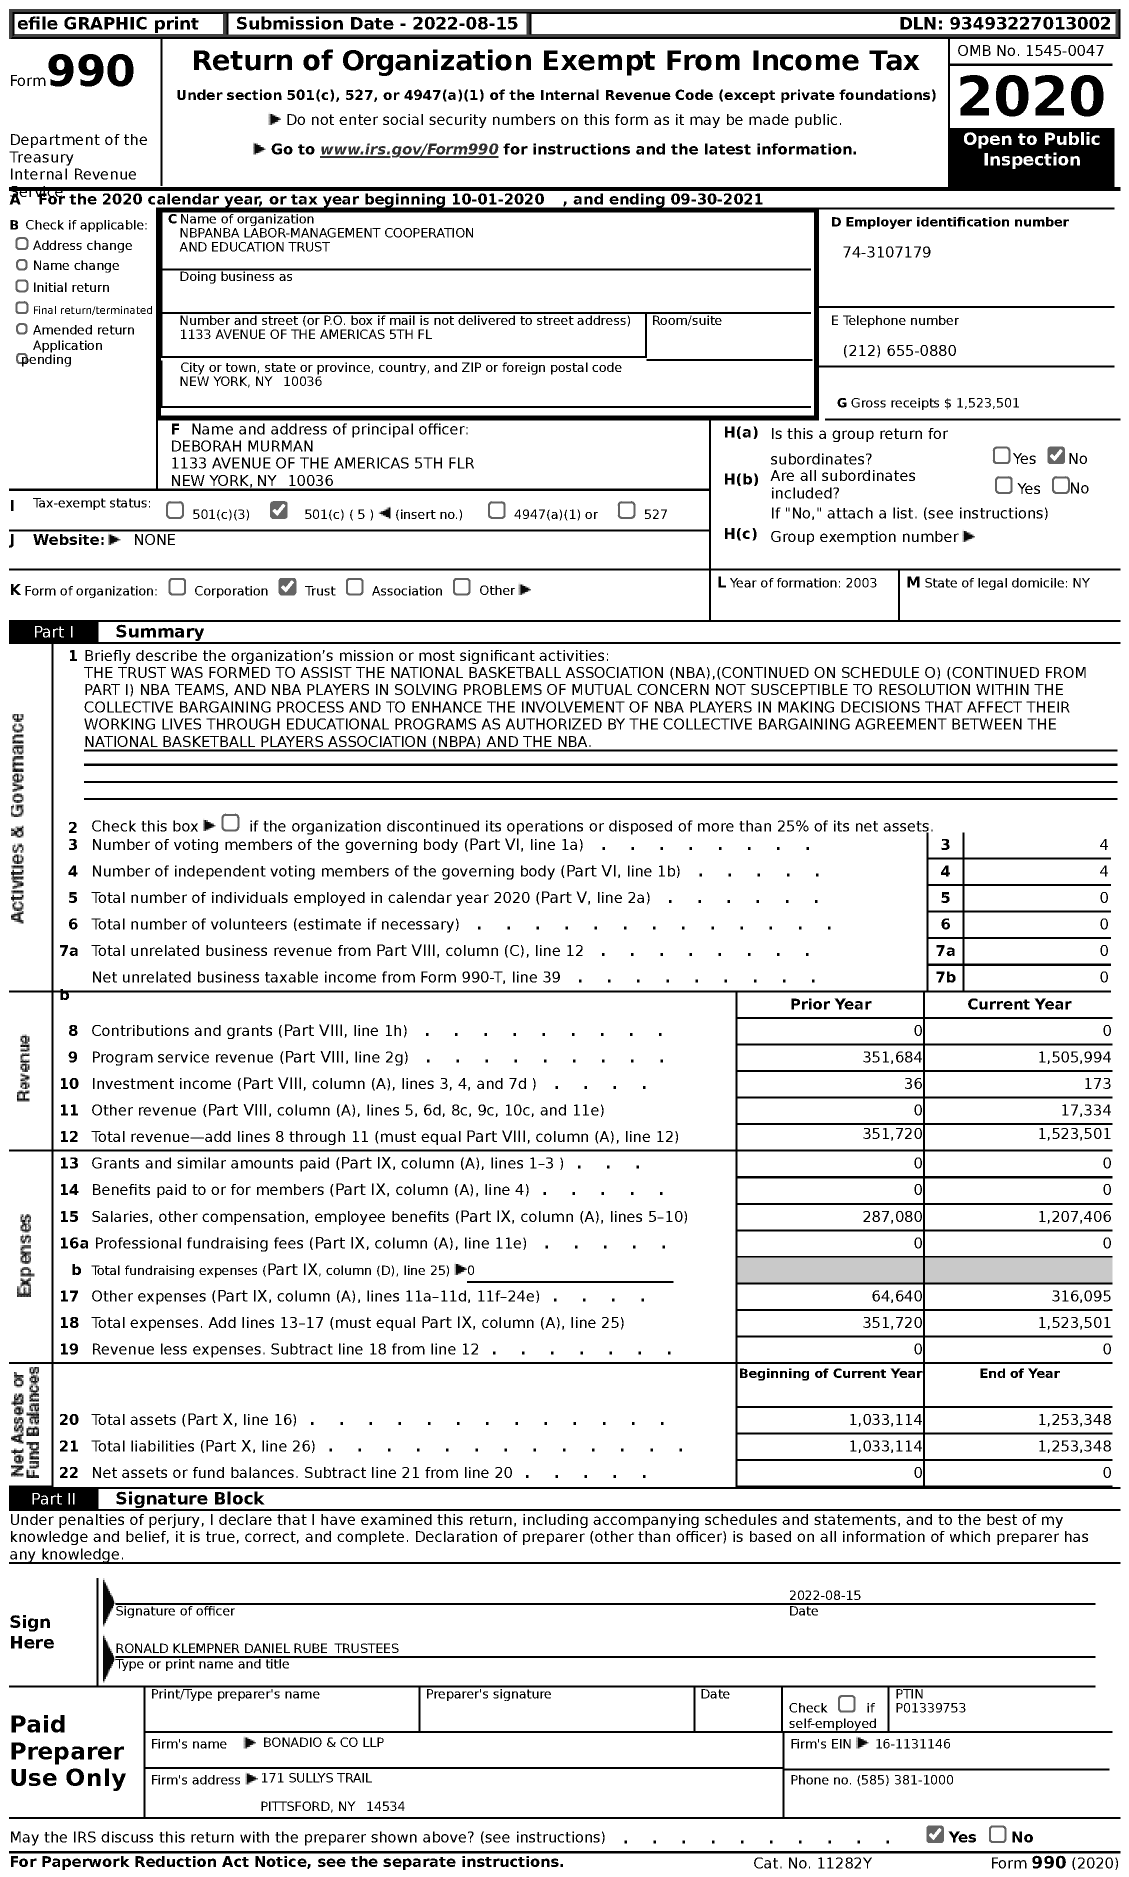 Image of first page of 2020 Form 990 for Nbpanba Labor-Management Cooperation and Education Trust